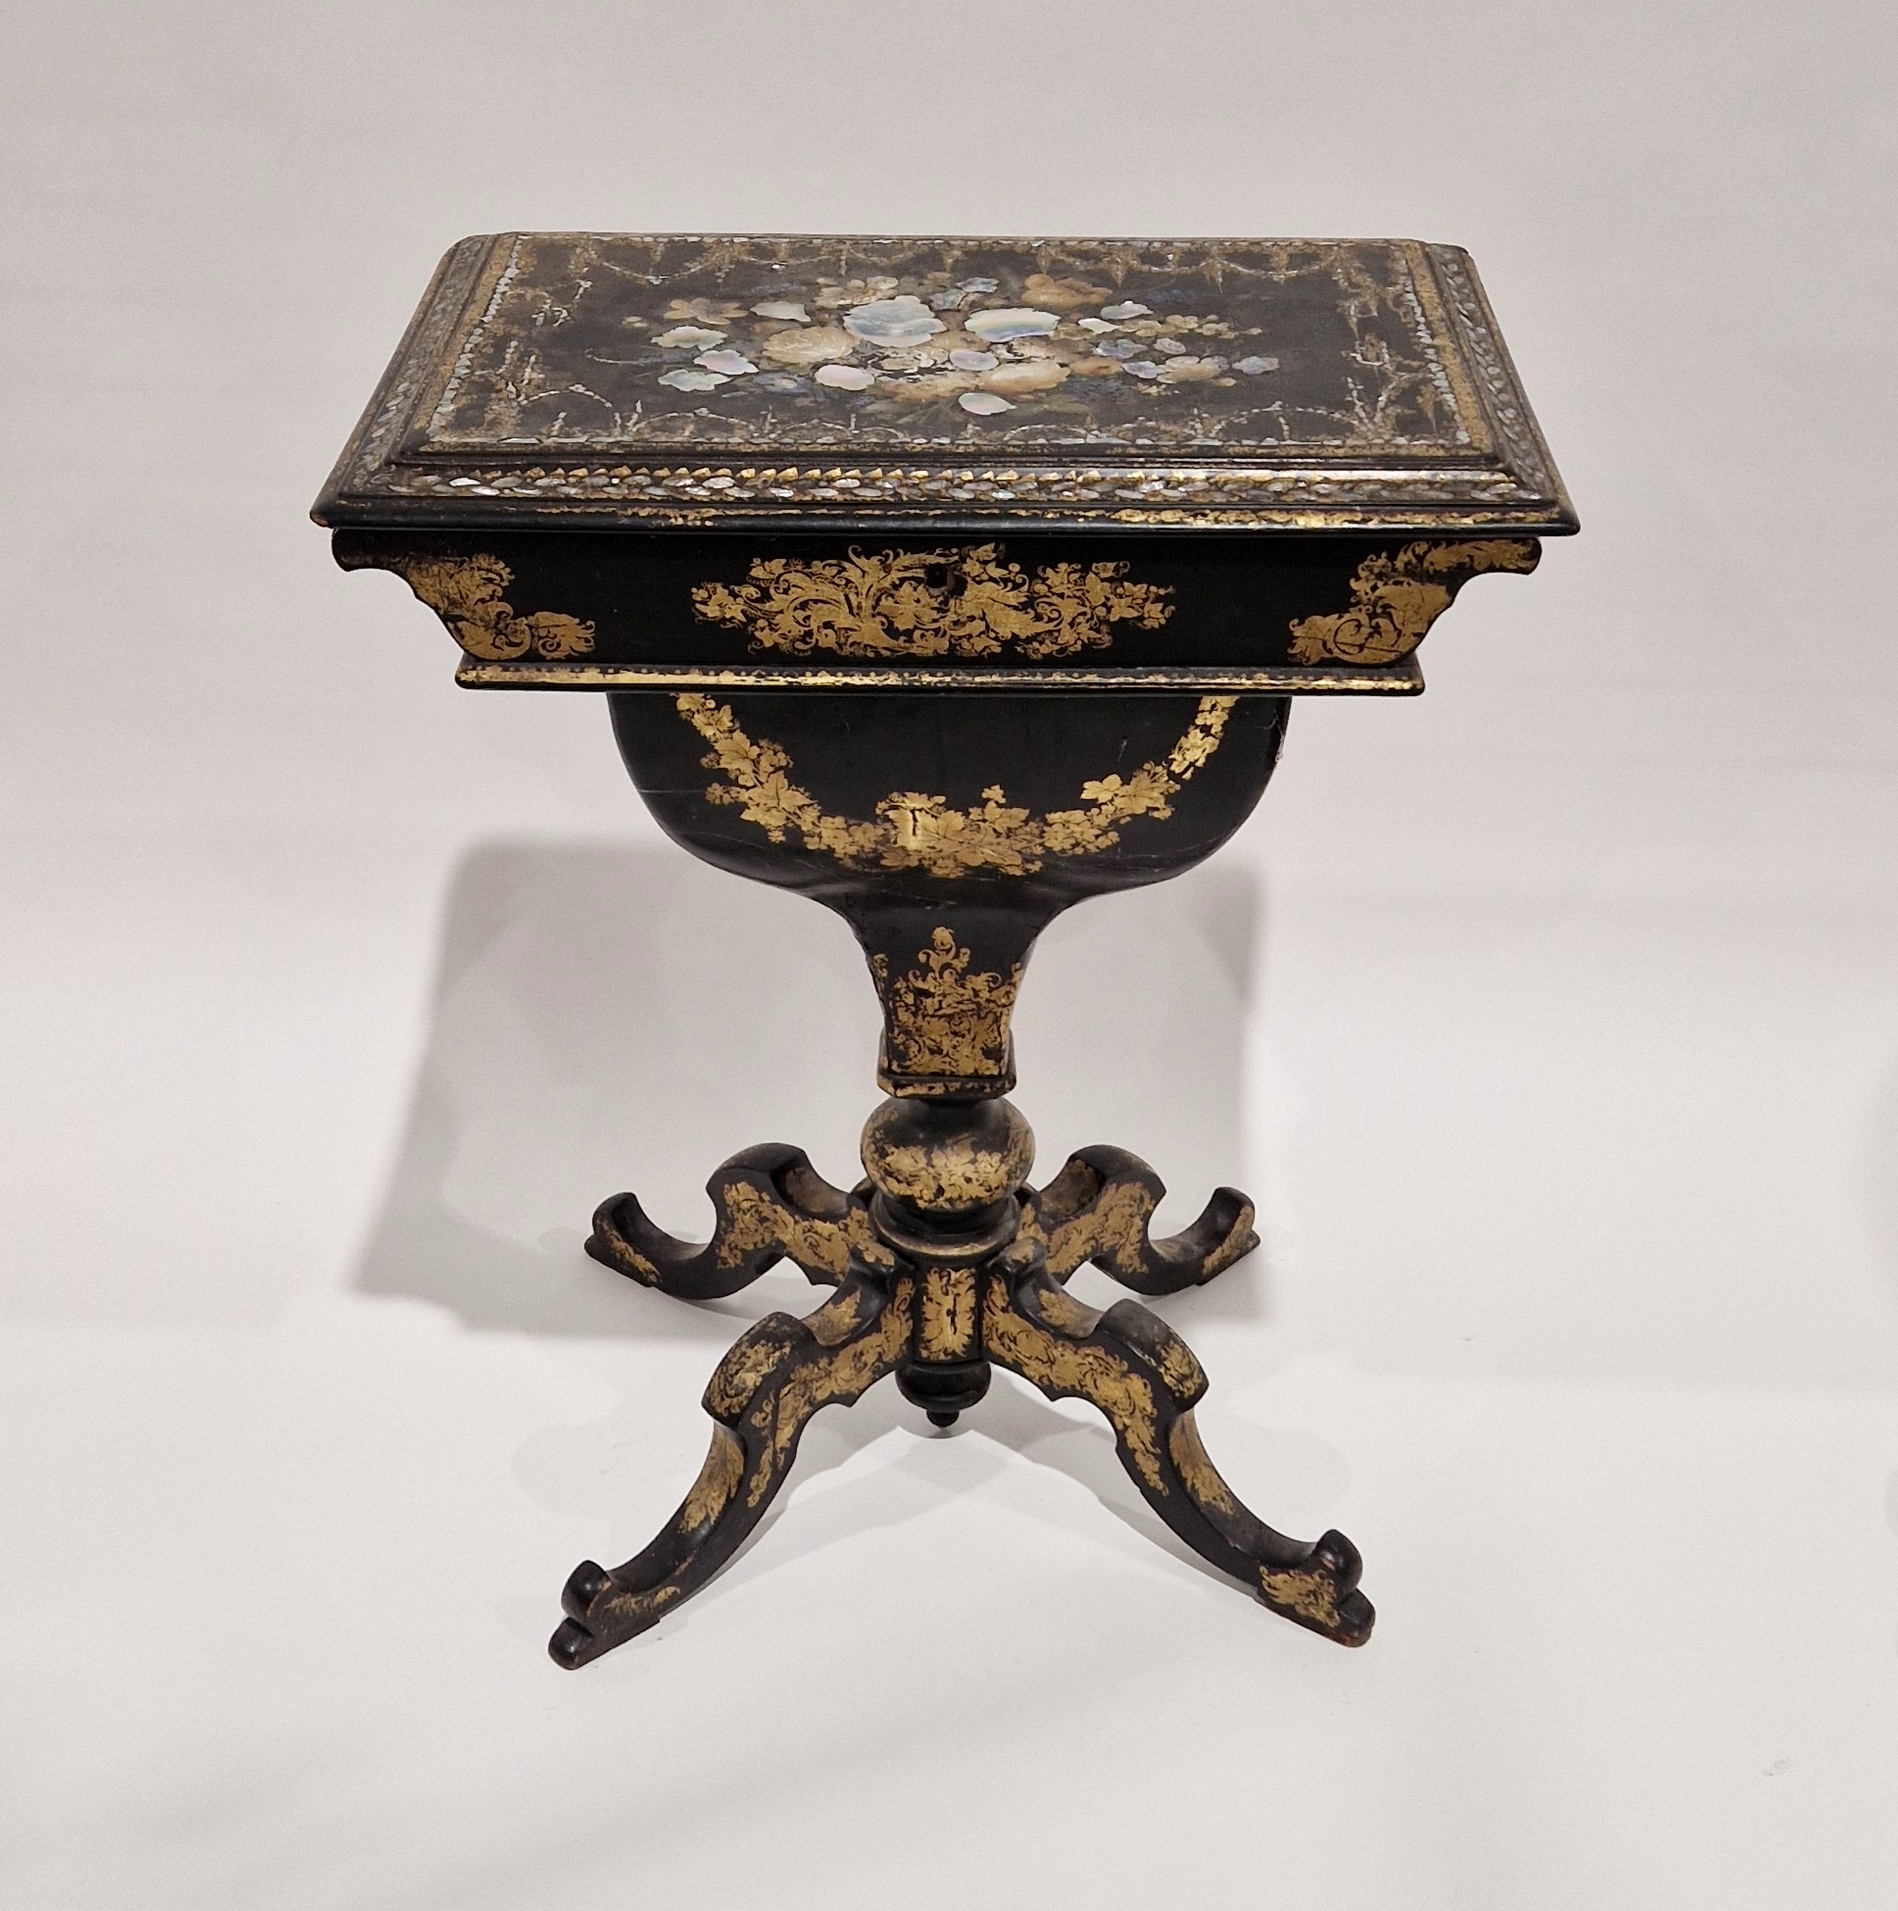 Victorian papiermache work table, the rectangular top inlaid with mother-of-pearl flowers and